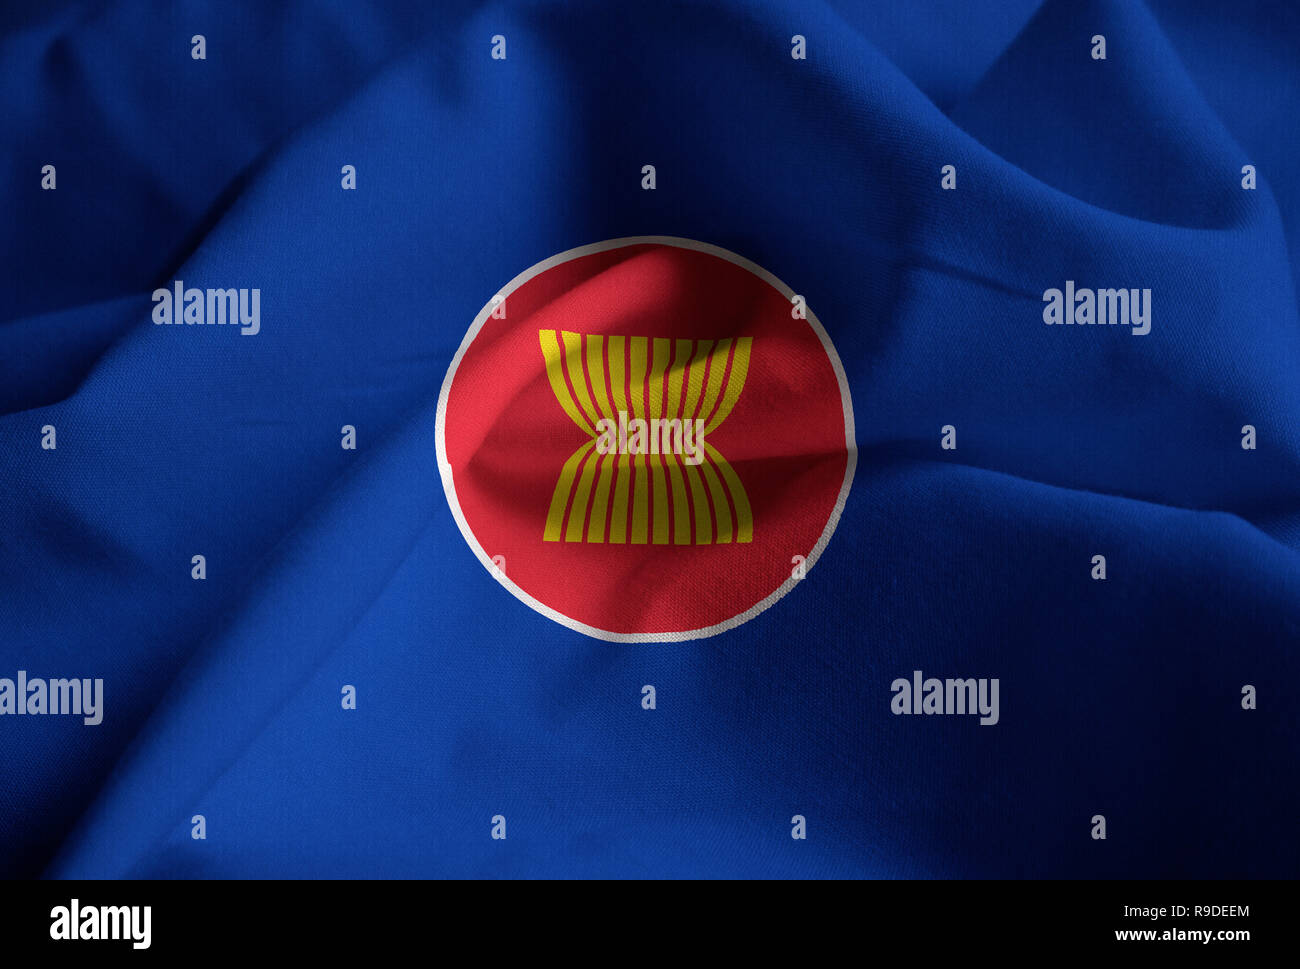 Closeup of Ruffled Association of Southeast Asian Nations Flag, ASEAN Flag Blowing in Wind Stock Photo